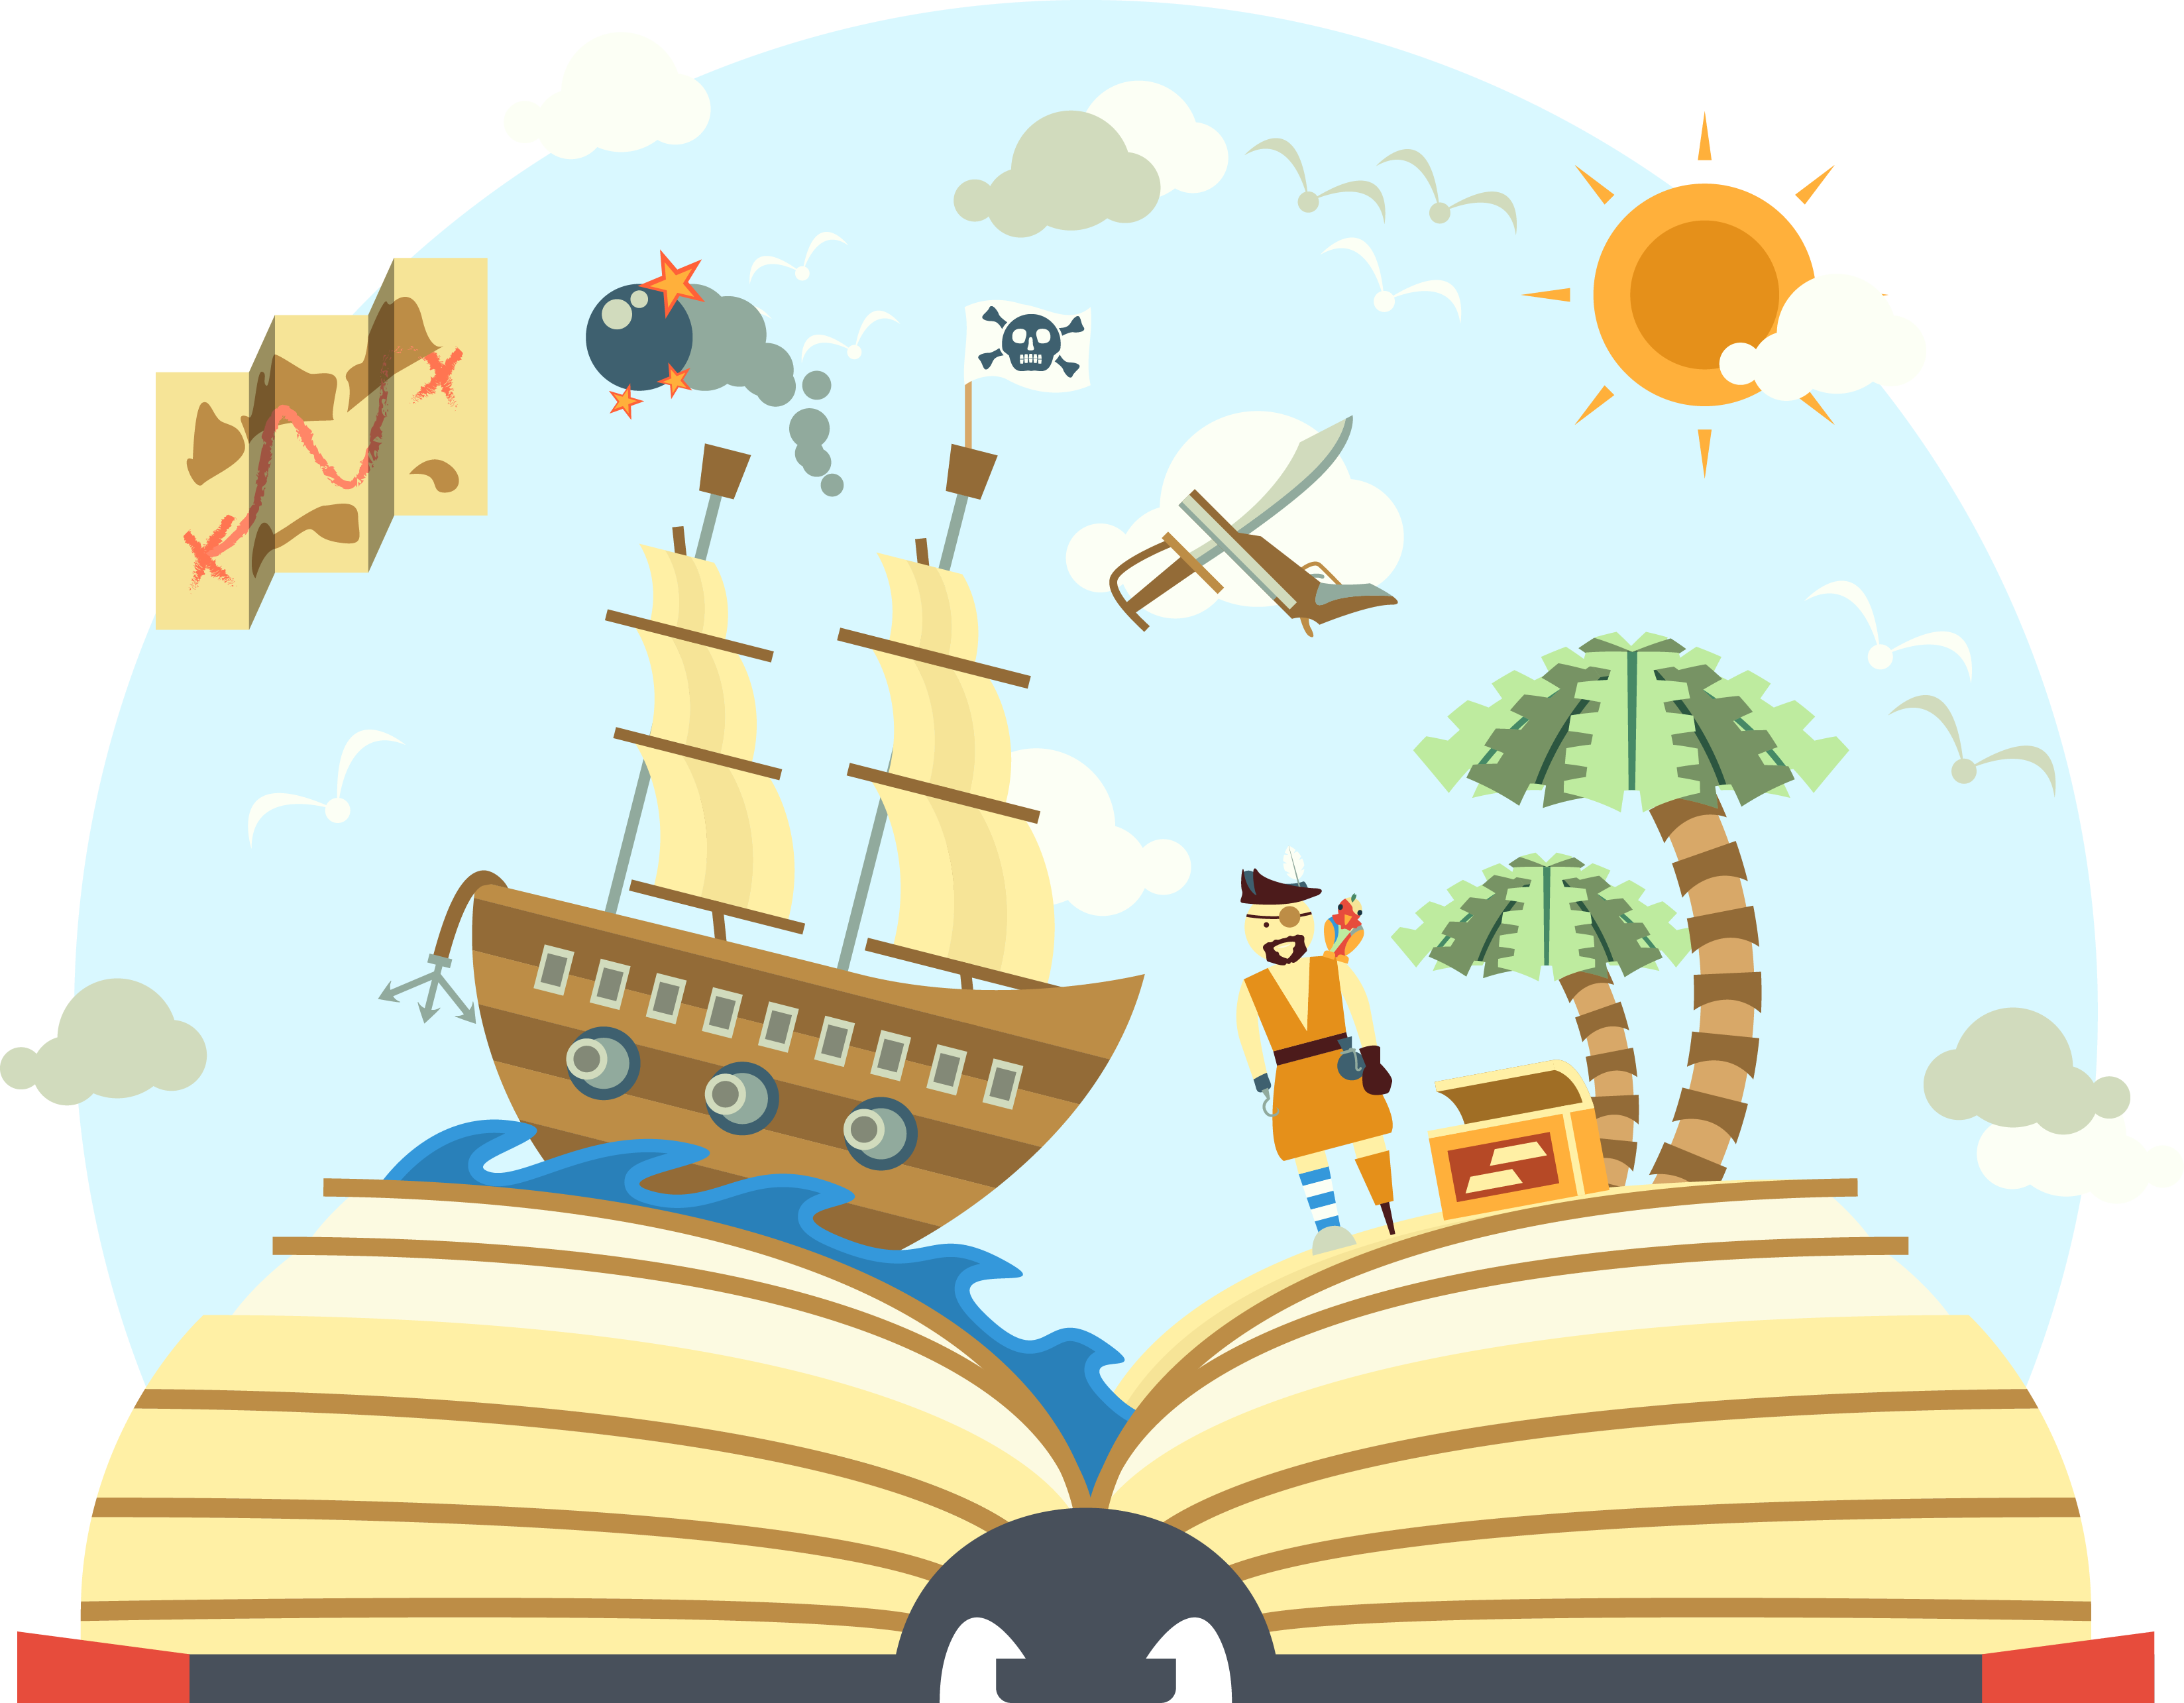 An Open Book With A Pirate Ship And A Pirate Ship